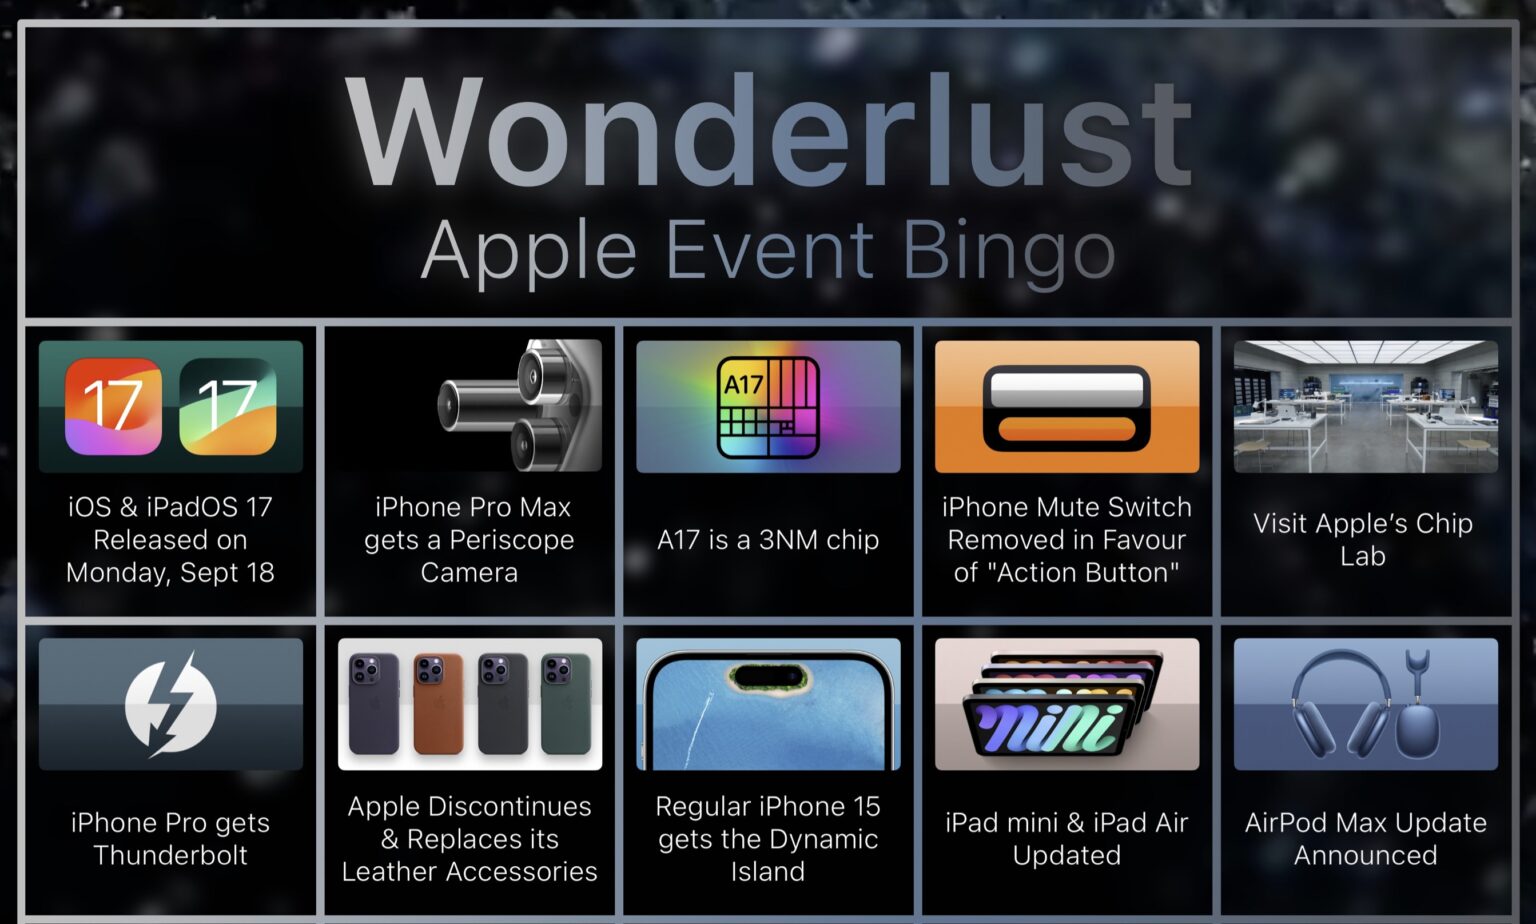 Basic Apple Guy's richly designed Wonderlust Apple Event Bingo card covers most likely announcements.